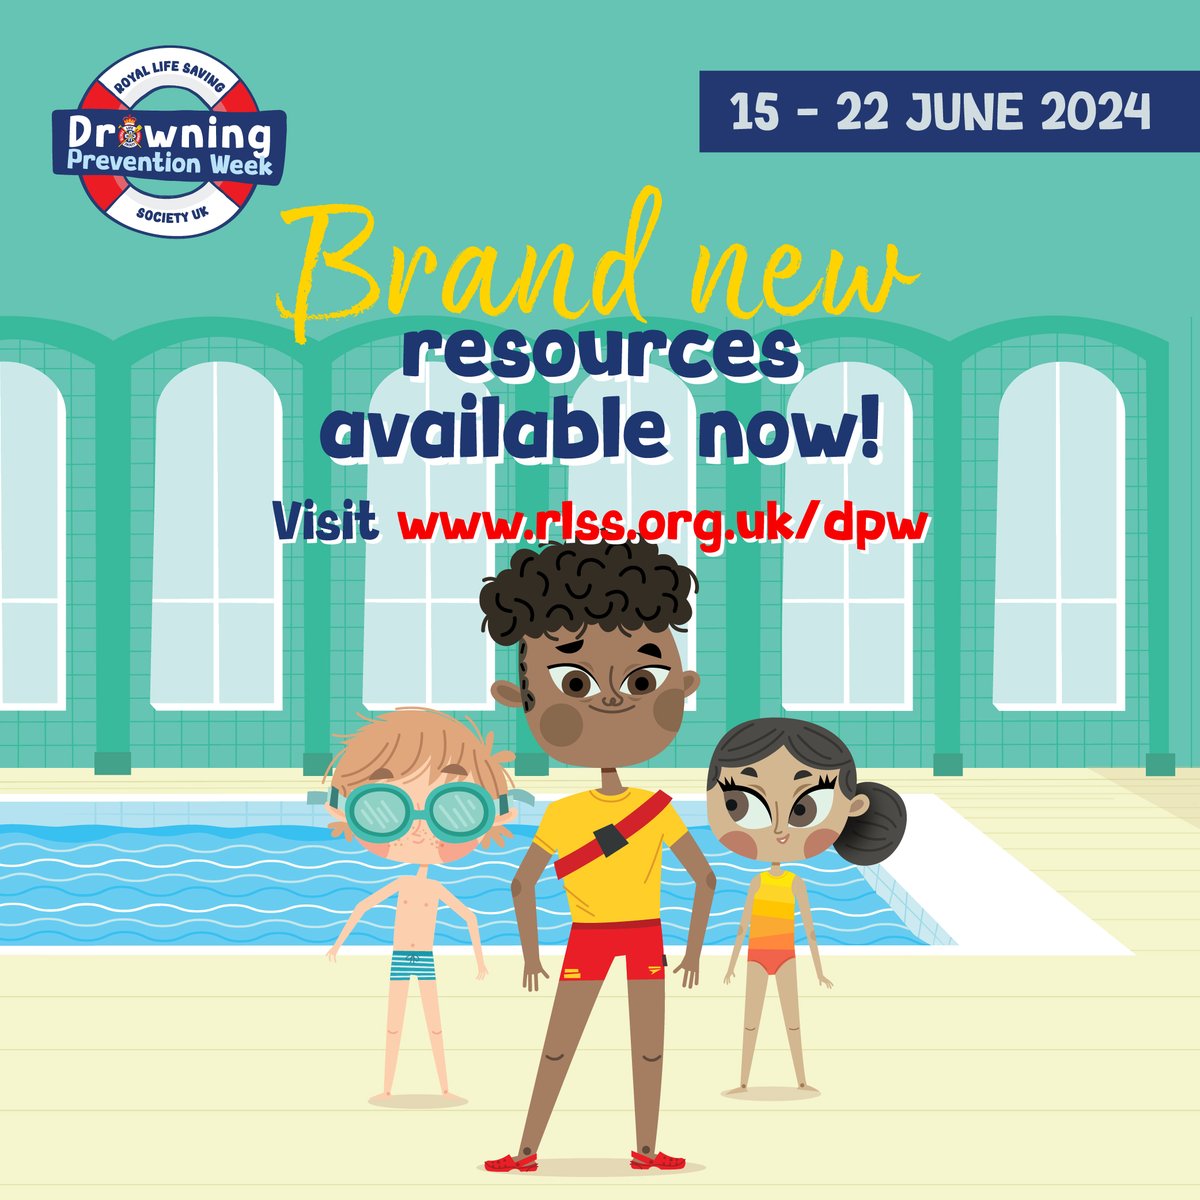 Together, we educated 1.85m children in Water Safety during #DrowningPreventionWeek 2023. Can you help us to reach even more families this year? 🙏 Our amazing suite of free resources (including some brand-new items) are available to download NOW! 😁 rlss.org.uk/dpw